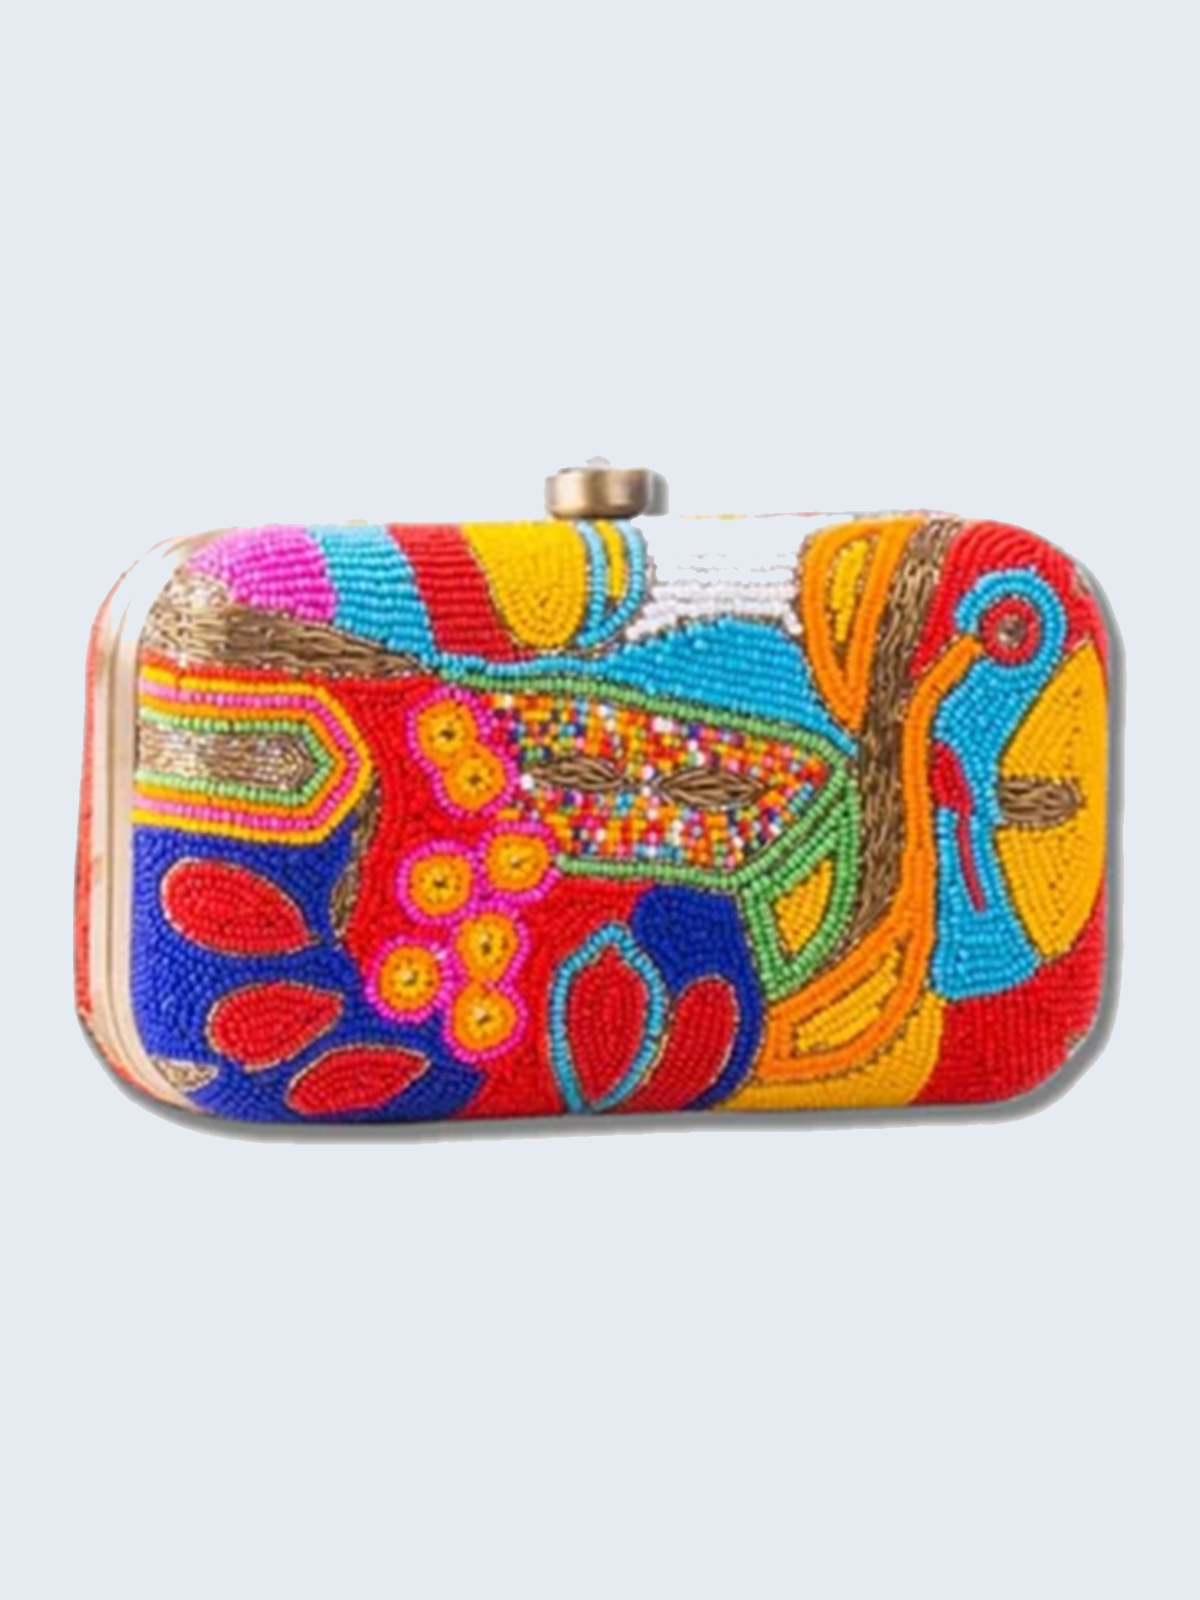 Multi Coloured Exclusive Hand Bag and Clutch Bag 2 Pcs Combo( 2 Bags)! –  Royskart